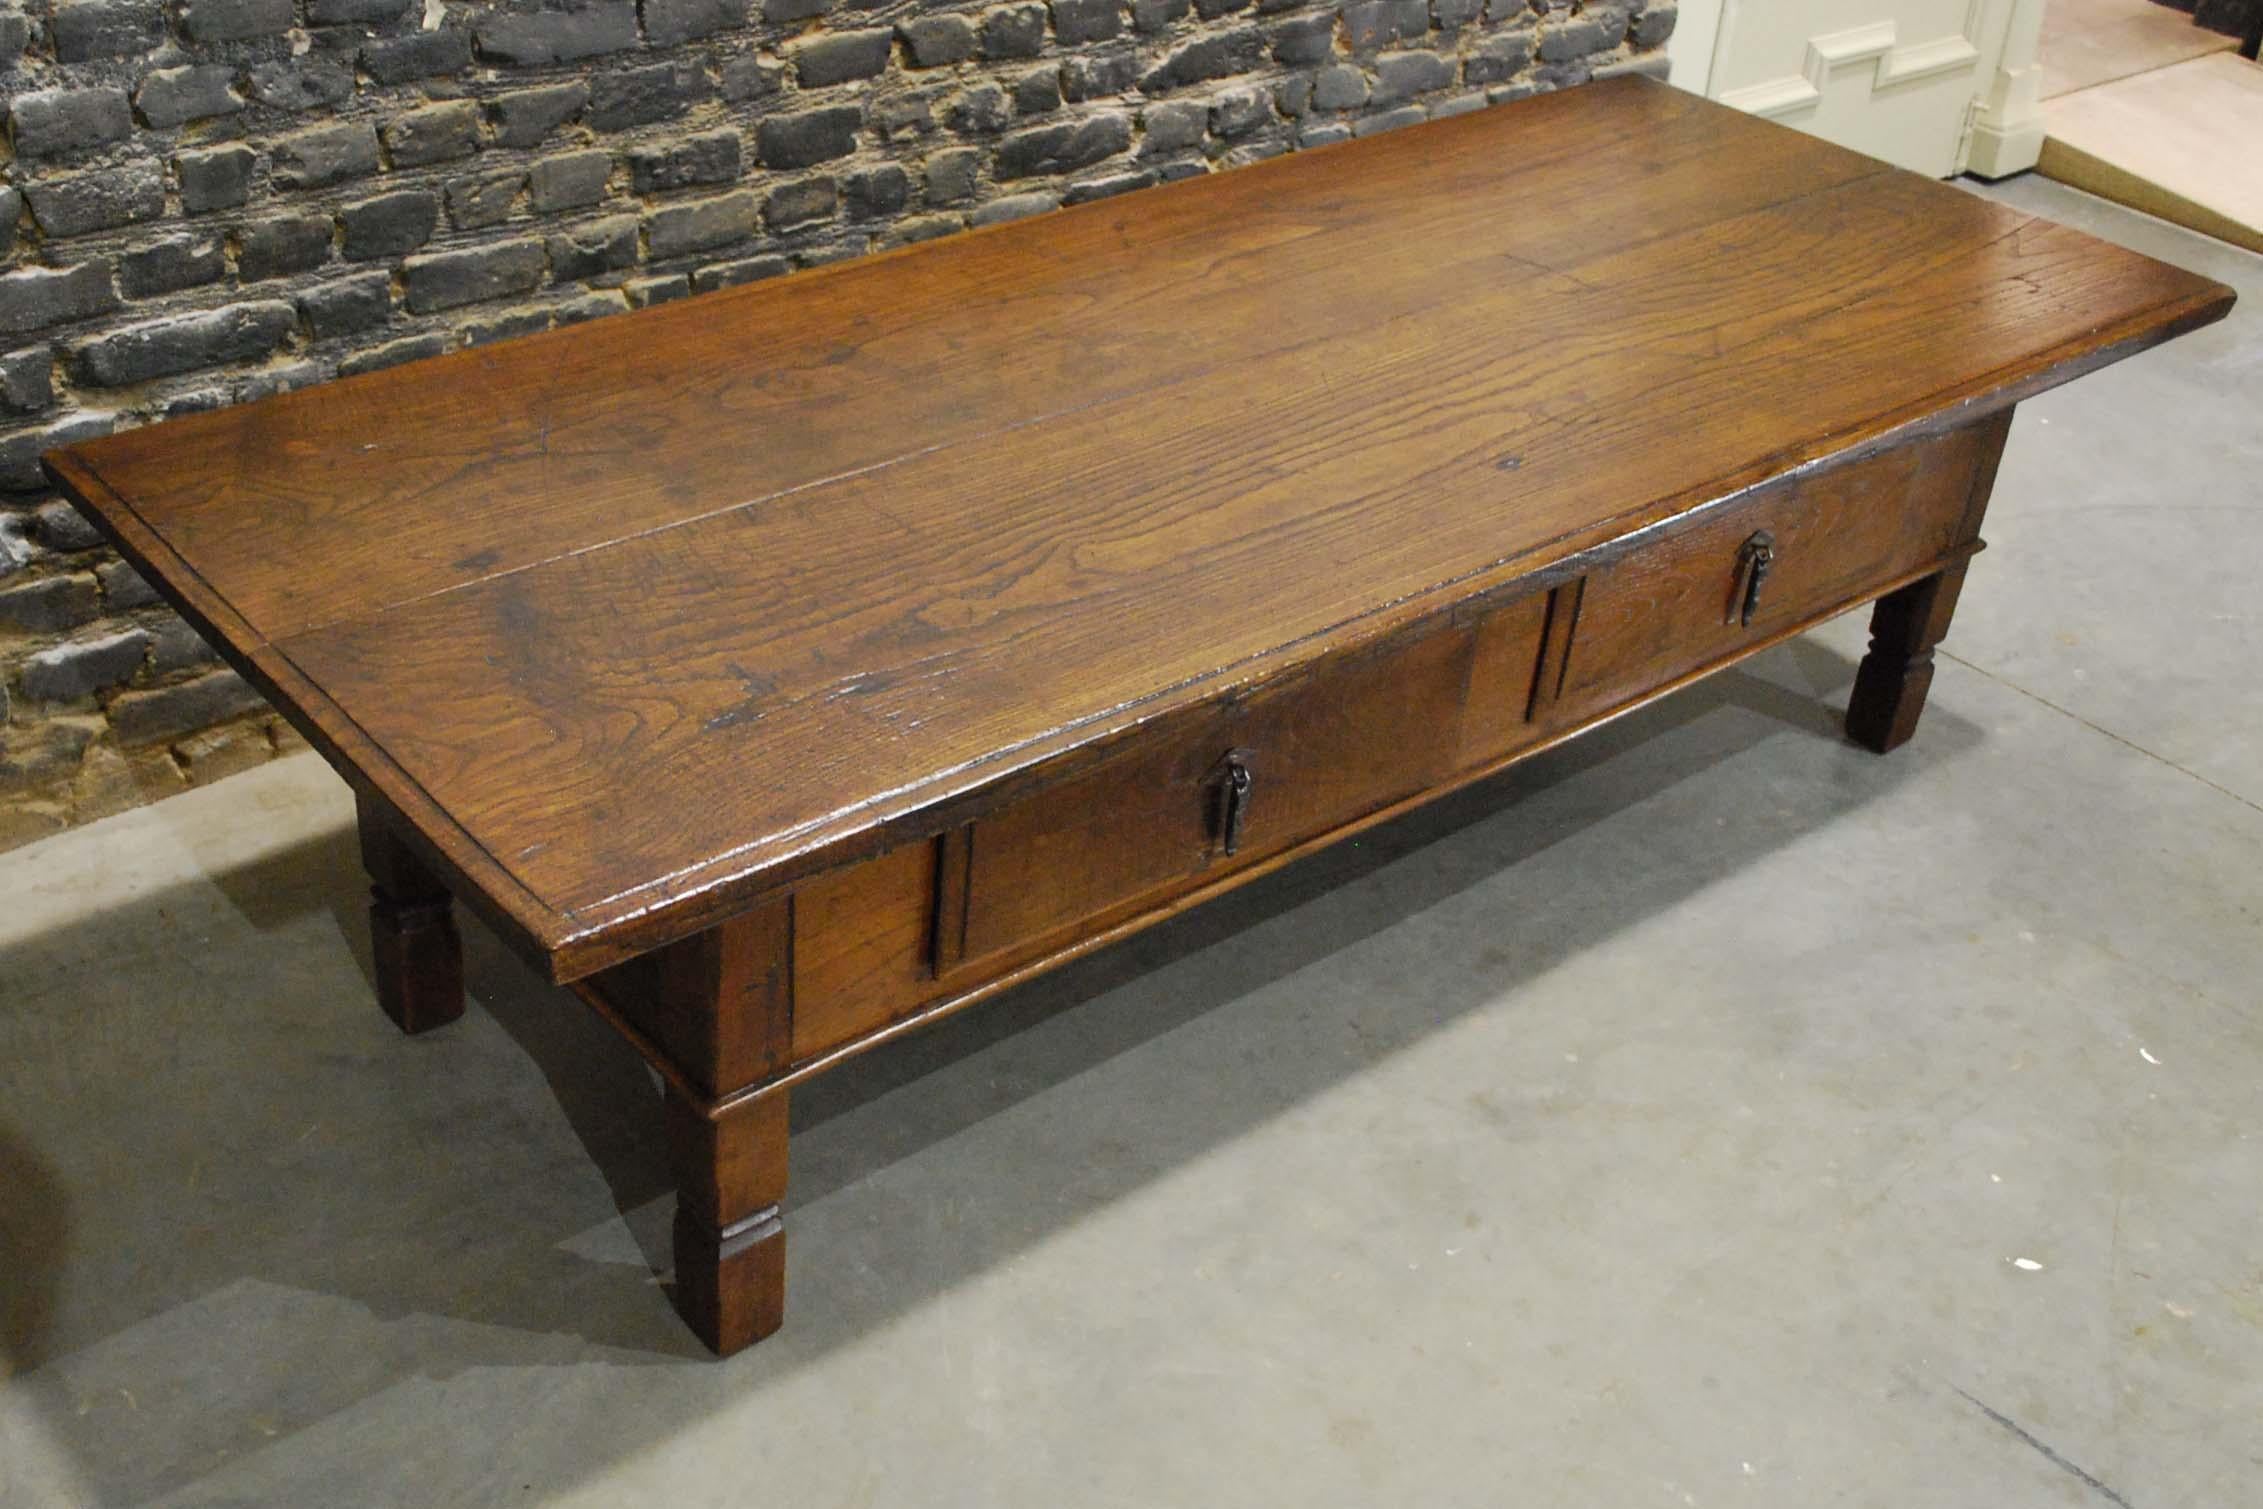 Forged Antique 18th Century Spanish Coffee Table in Solid Chestnut Wood